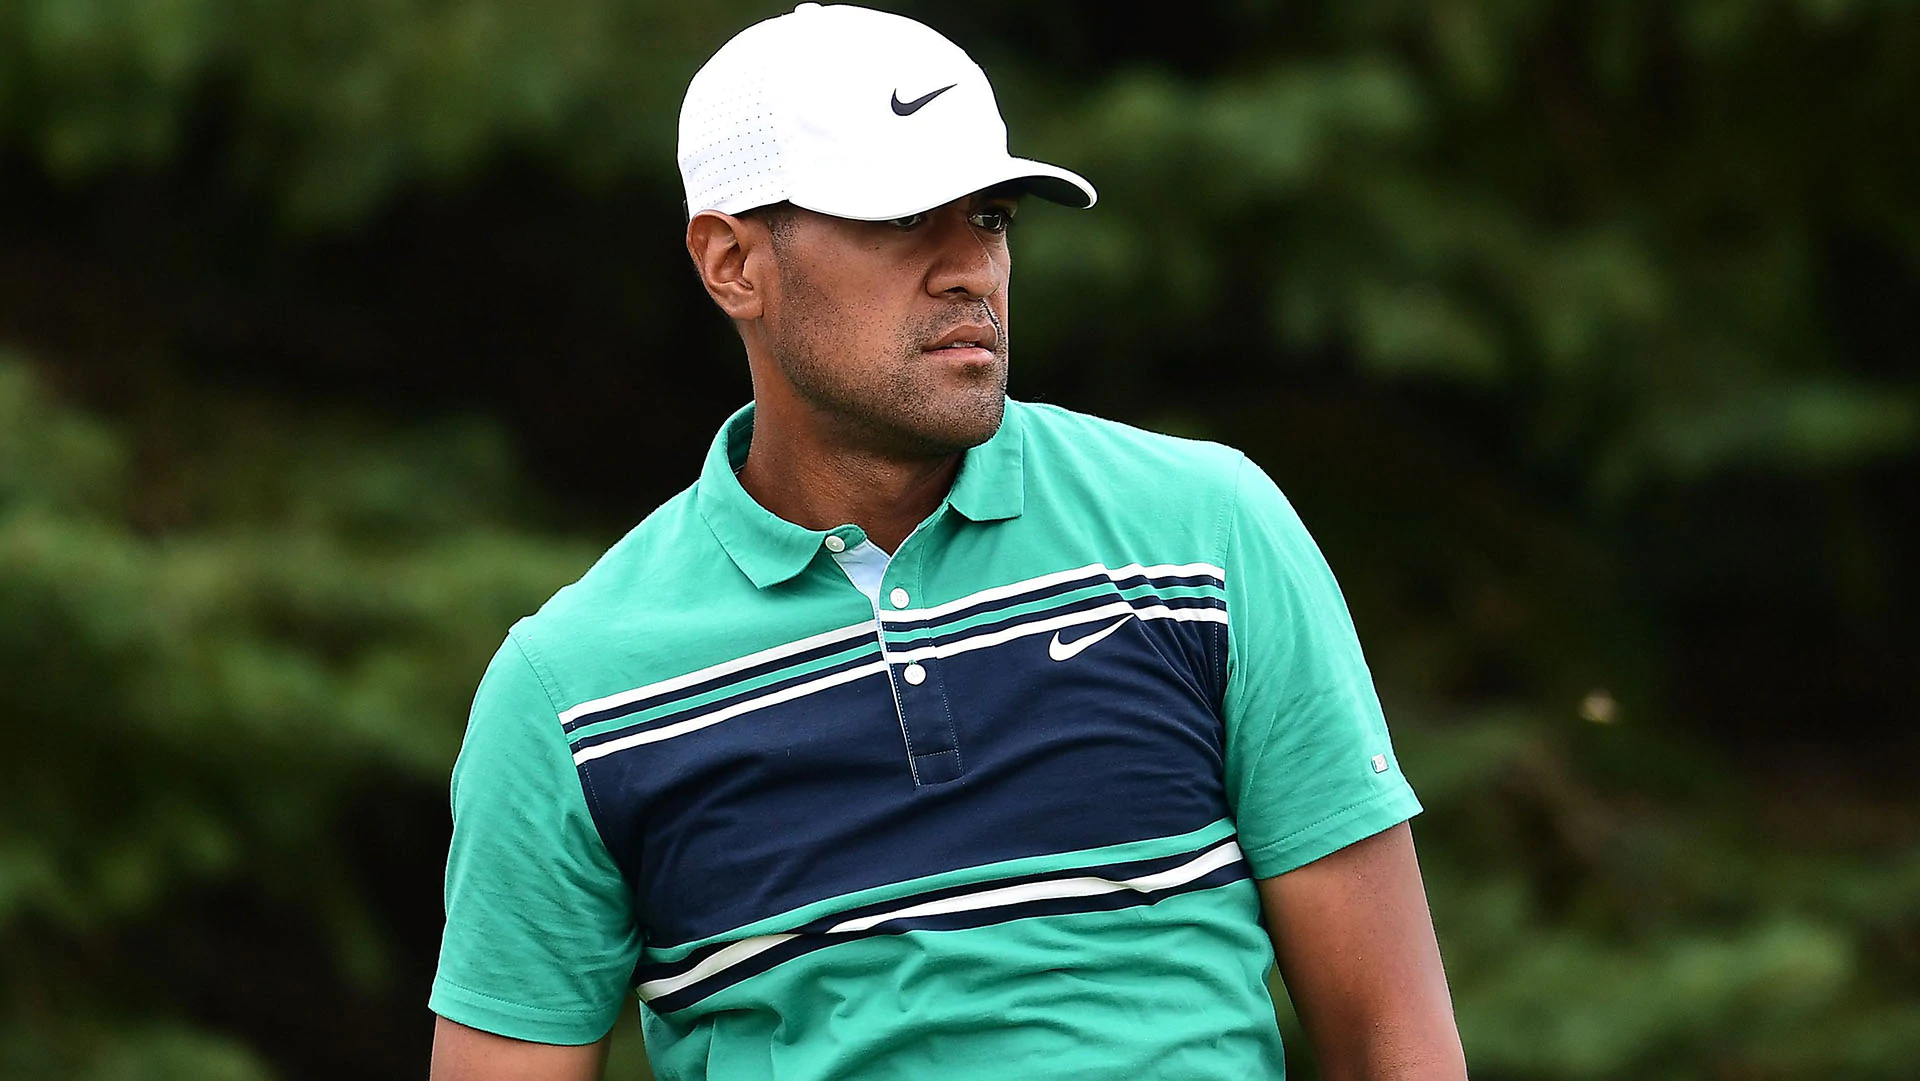 Tony Finau has another chance to break Puerto Rico Open curse at 3M Open